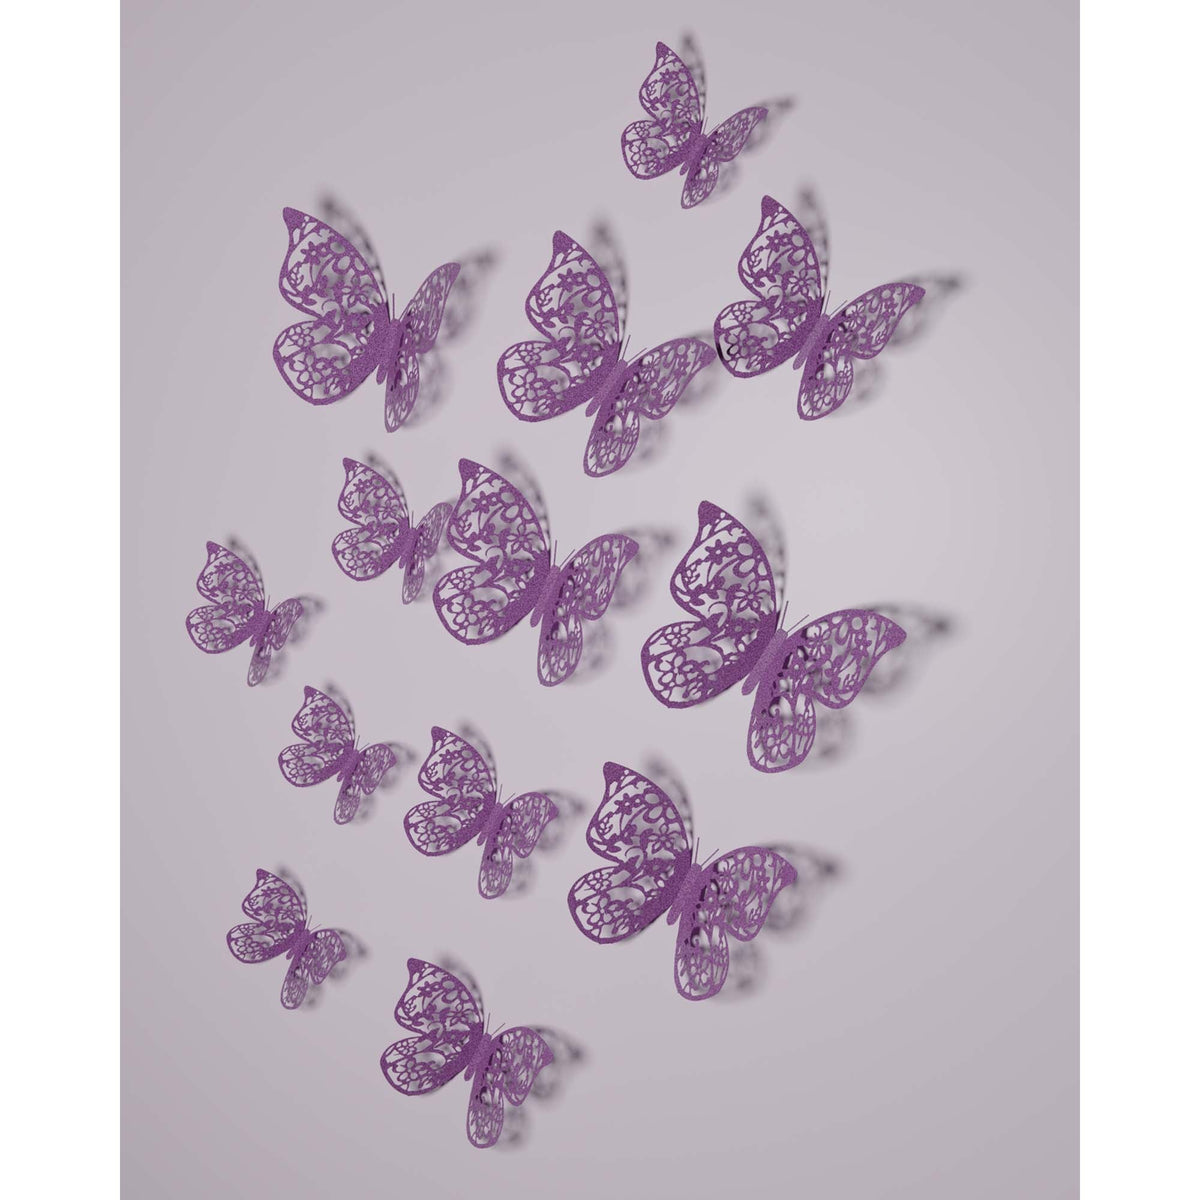 Guangzhou Tomas Crafts Co limited Balloons Purple 3D Butterfly Decorations, 12 Count 810120711195